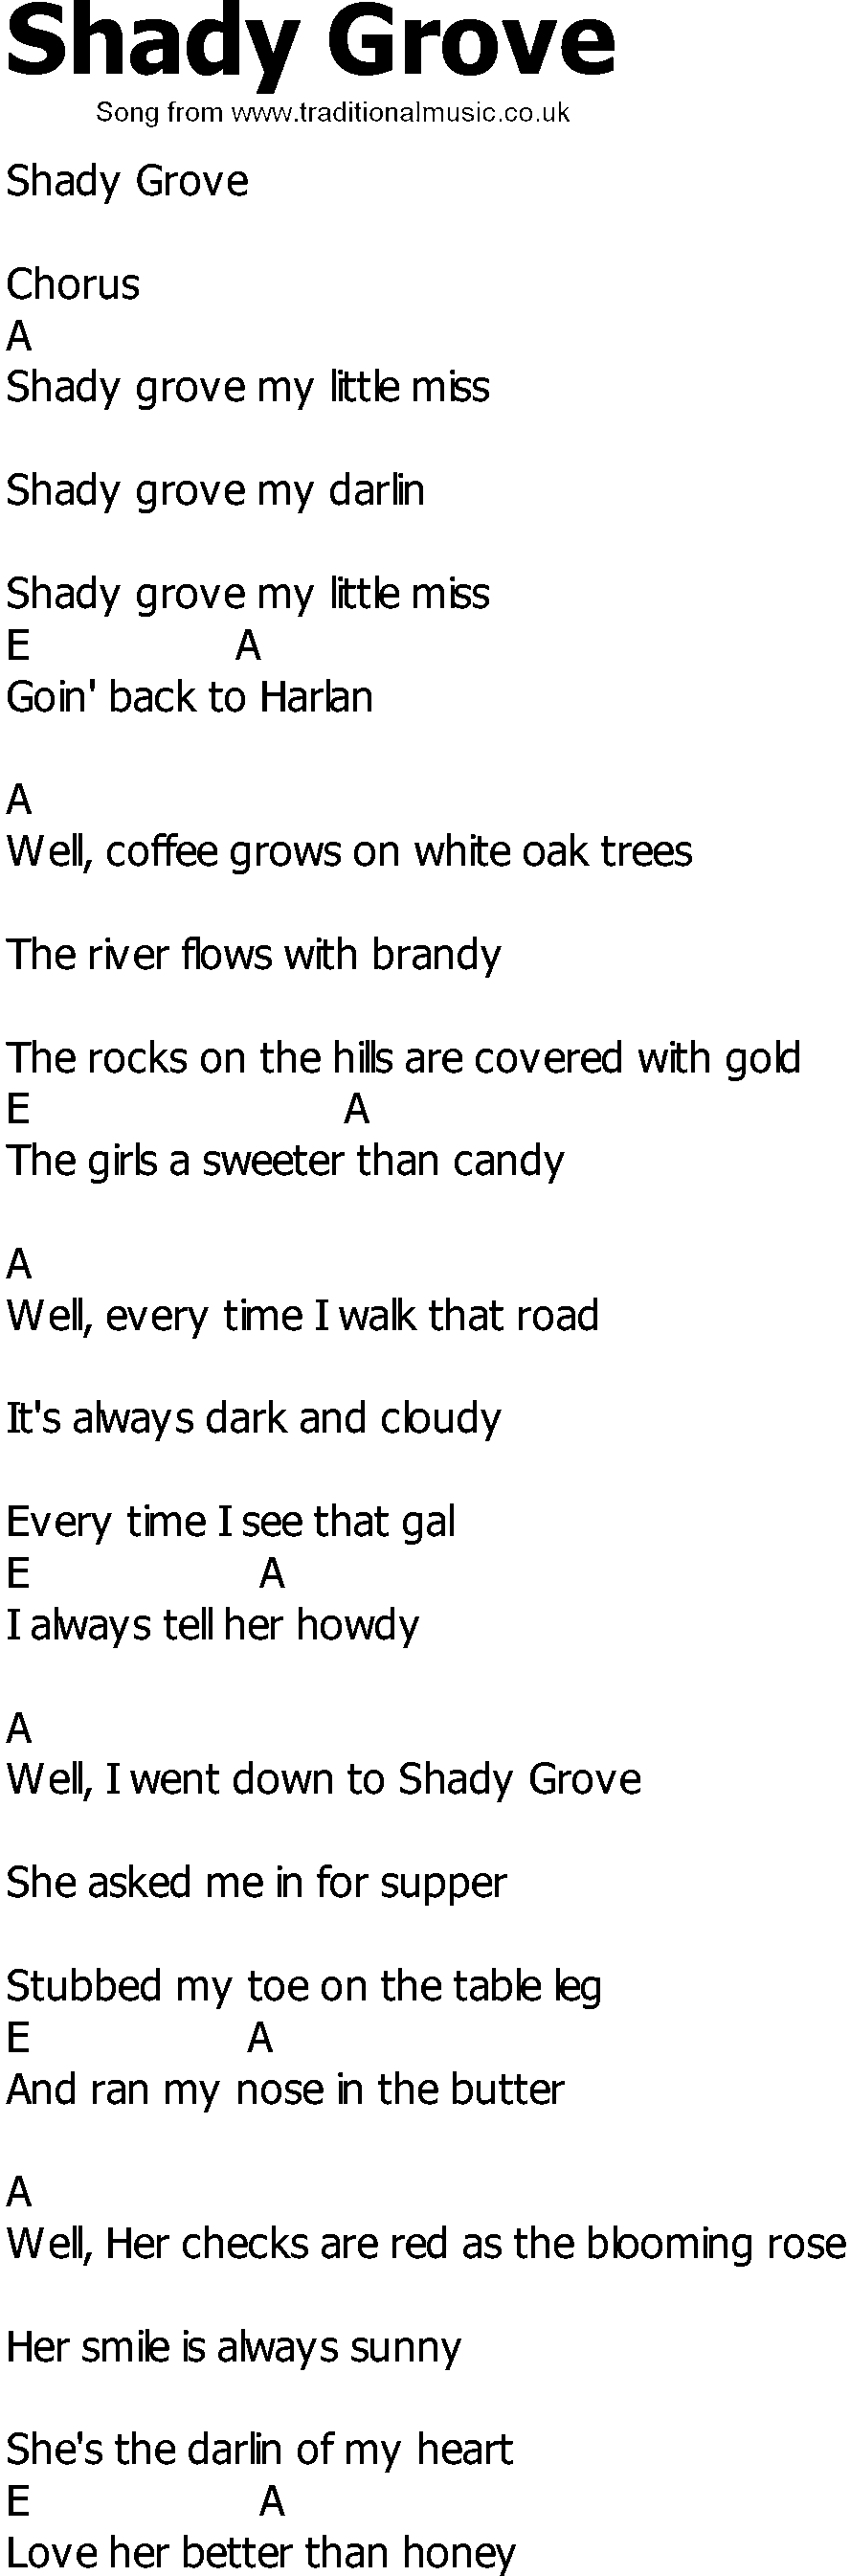 Old Country song lyrics with chords - Shady Grove